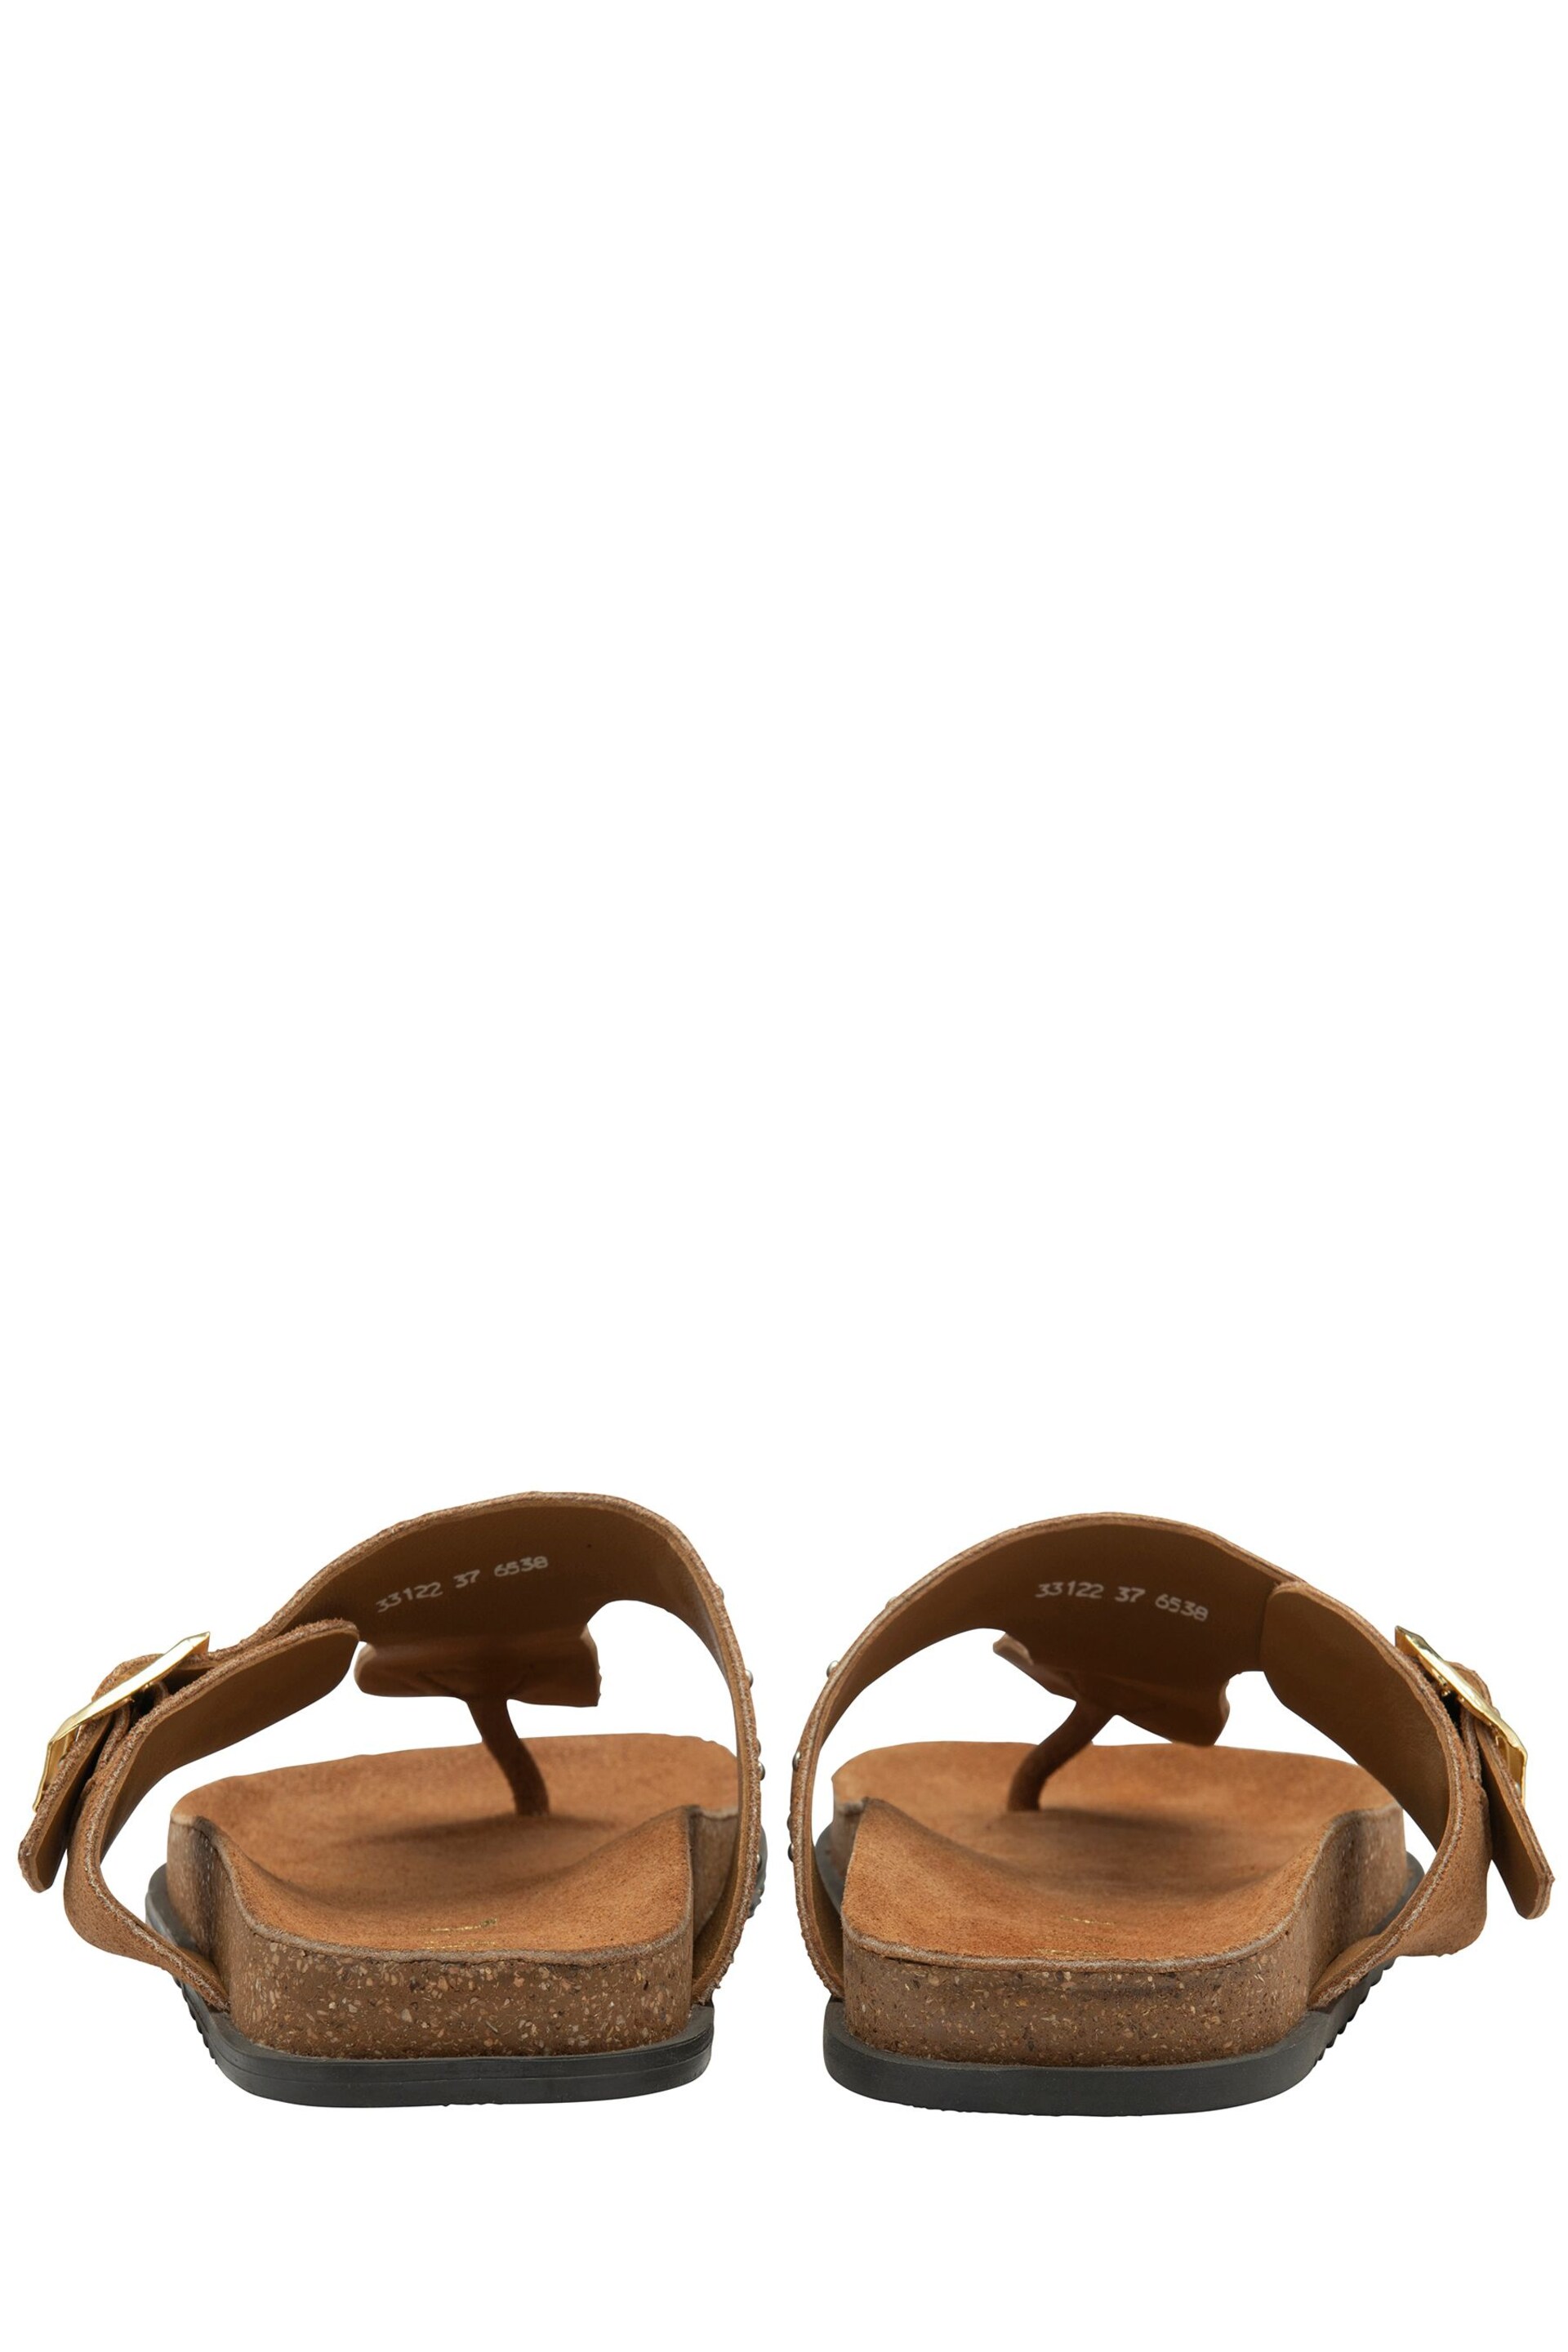 Ravel Brown Leather Mule Toe Post Sandals - Image 3 of 4